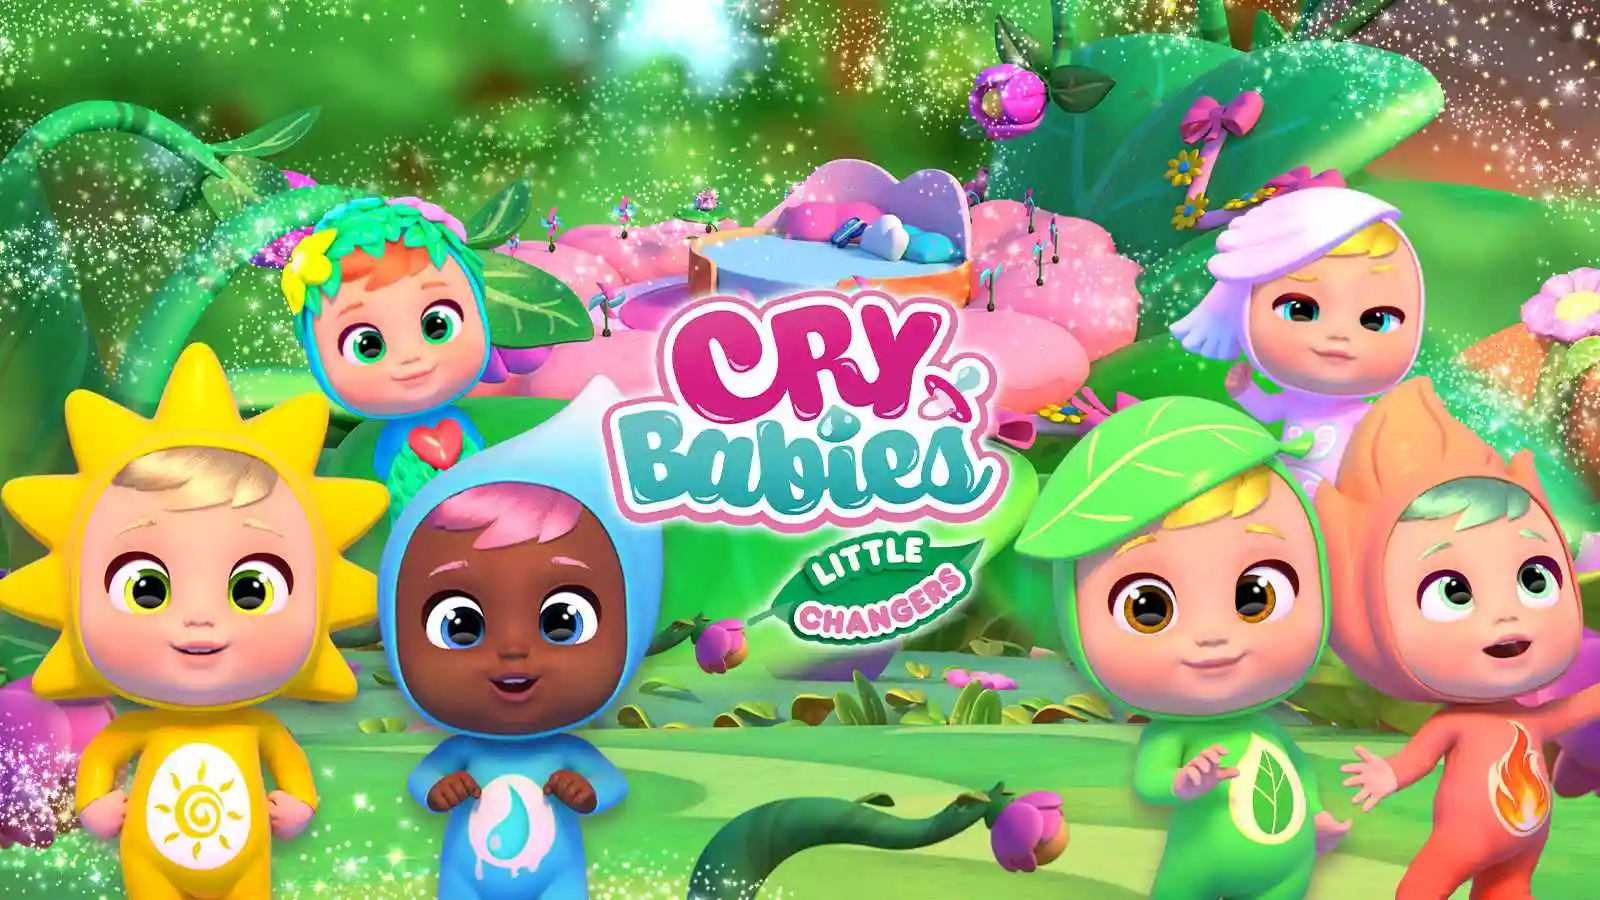 Cry Babies Little Changers is a show for toddlers and preschoolers about eco-friendly behavior